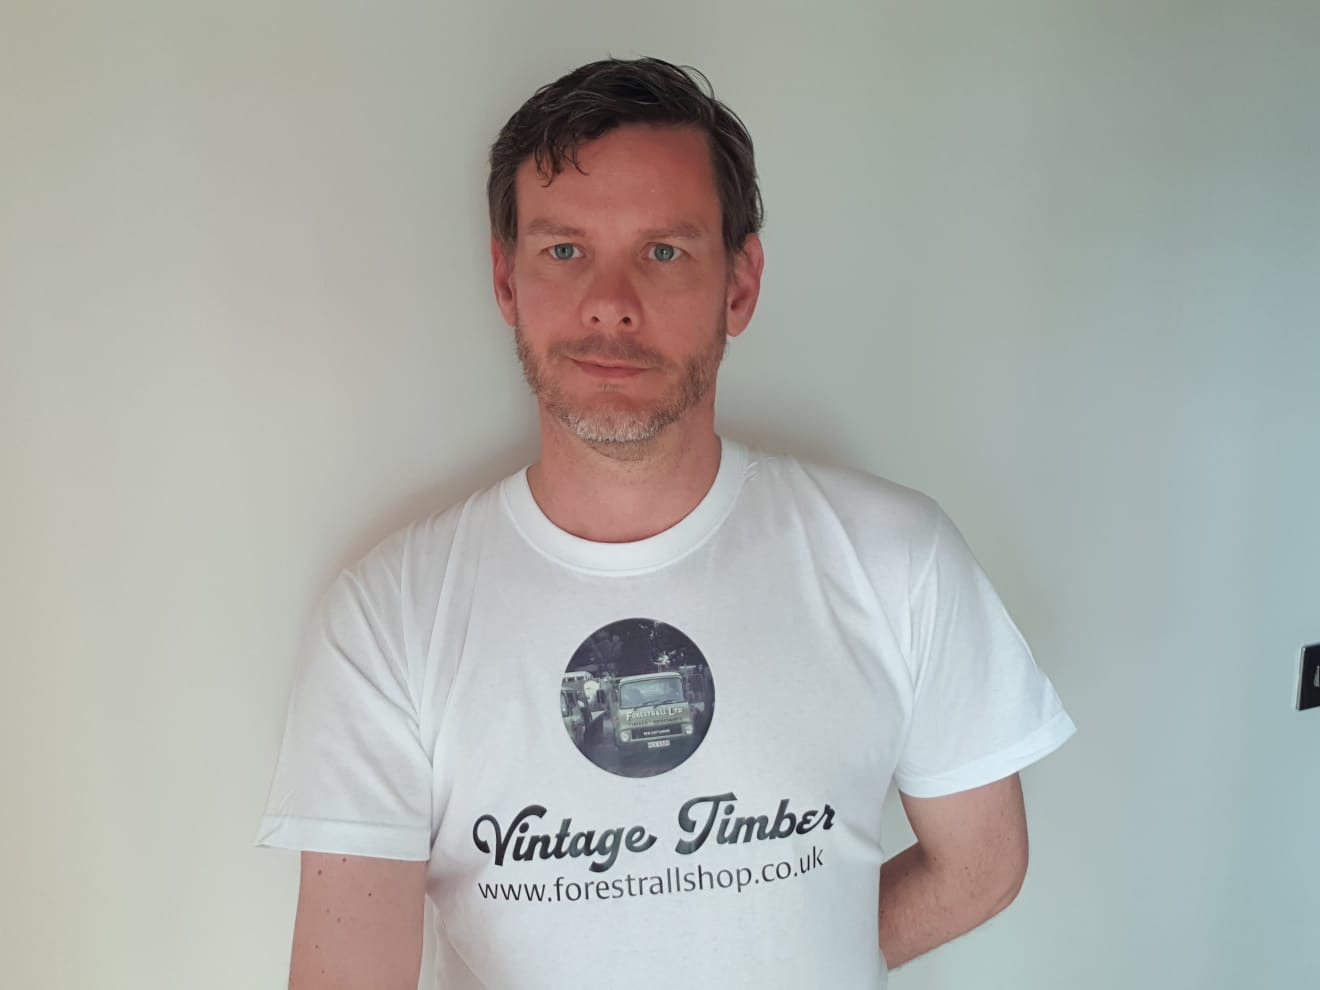 An image of Chris Porcas. He is a man with brown hair and some facial hair. He is wearing a white t-shirt with a logo for Vintage Timber and a web address.